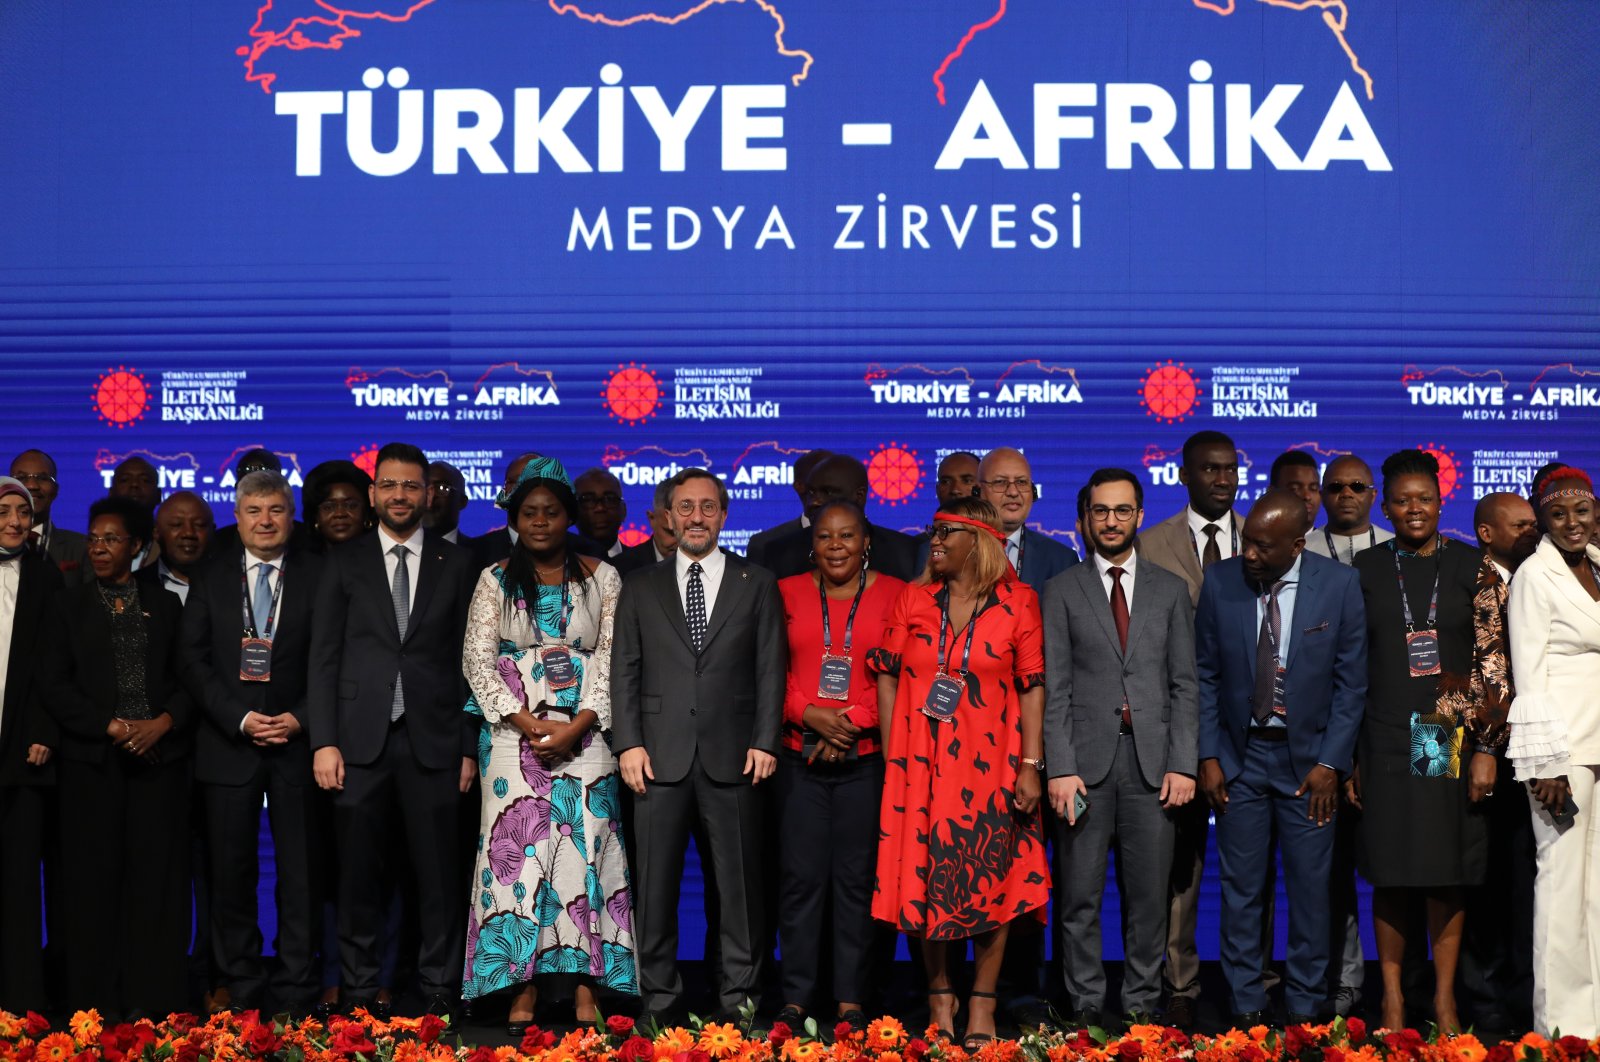 Communications Director Fahrettin Altun poses for a photo with media representatives during the Turkey-Africa Media Summit in Istanbul, Turkey, May 25, 2022. (AA Photo)